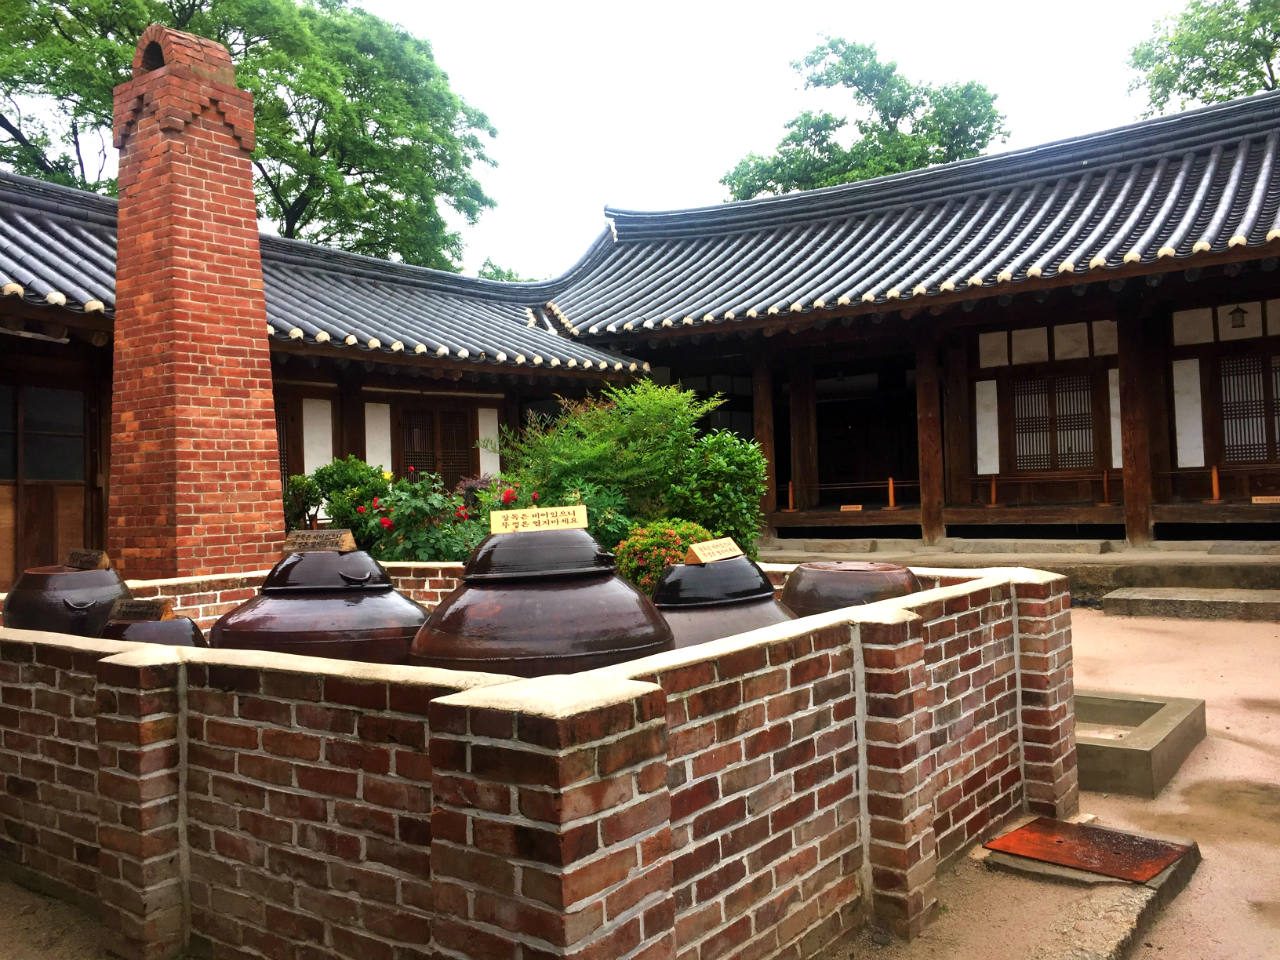 STEP INSIDE. And see for yourself how previous generations of the Choi clan lived. 